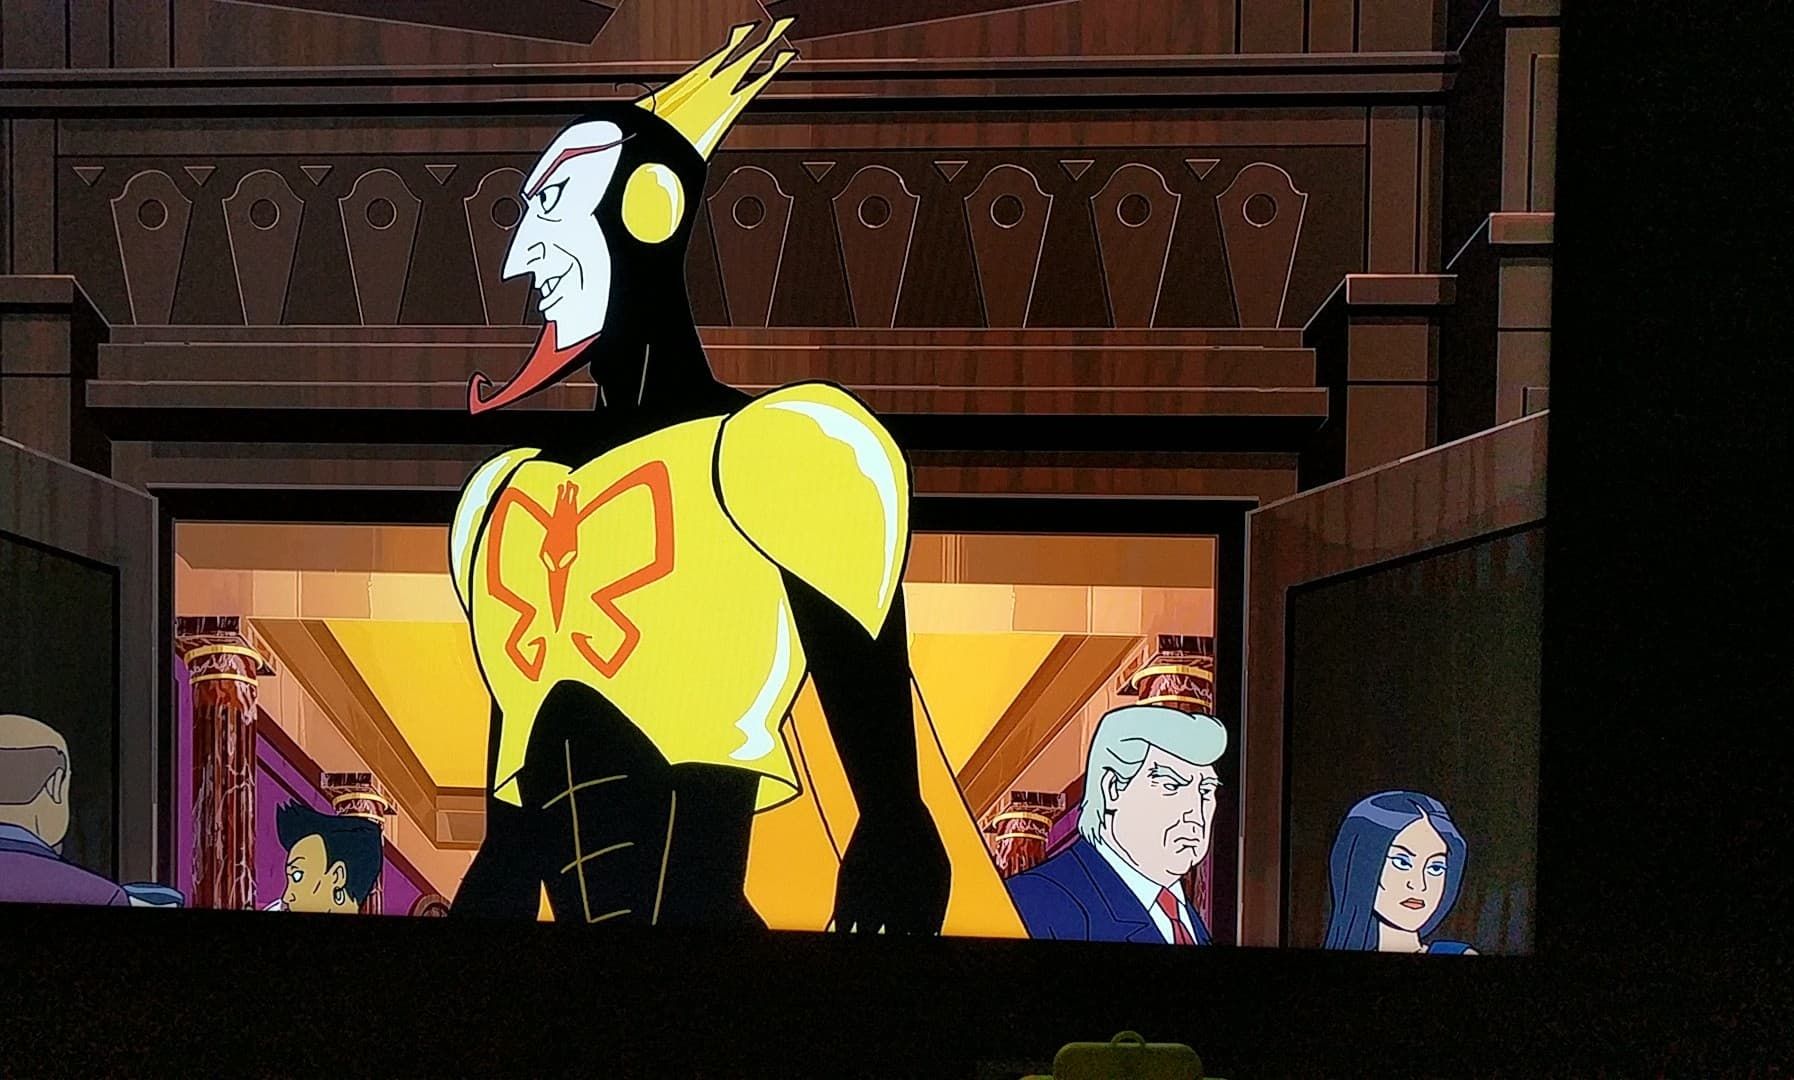 So i was watching season 6 of venture brothers and a seen came up where there was a Gathering of villains and i noticed something in the background.